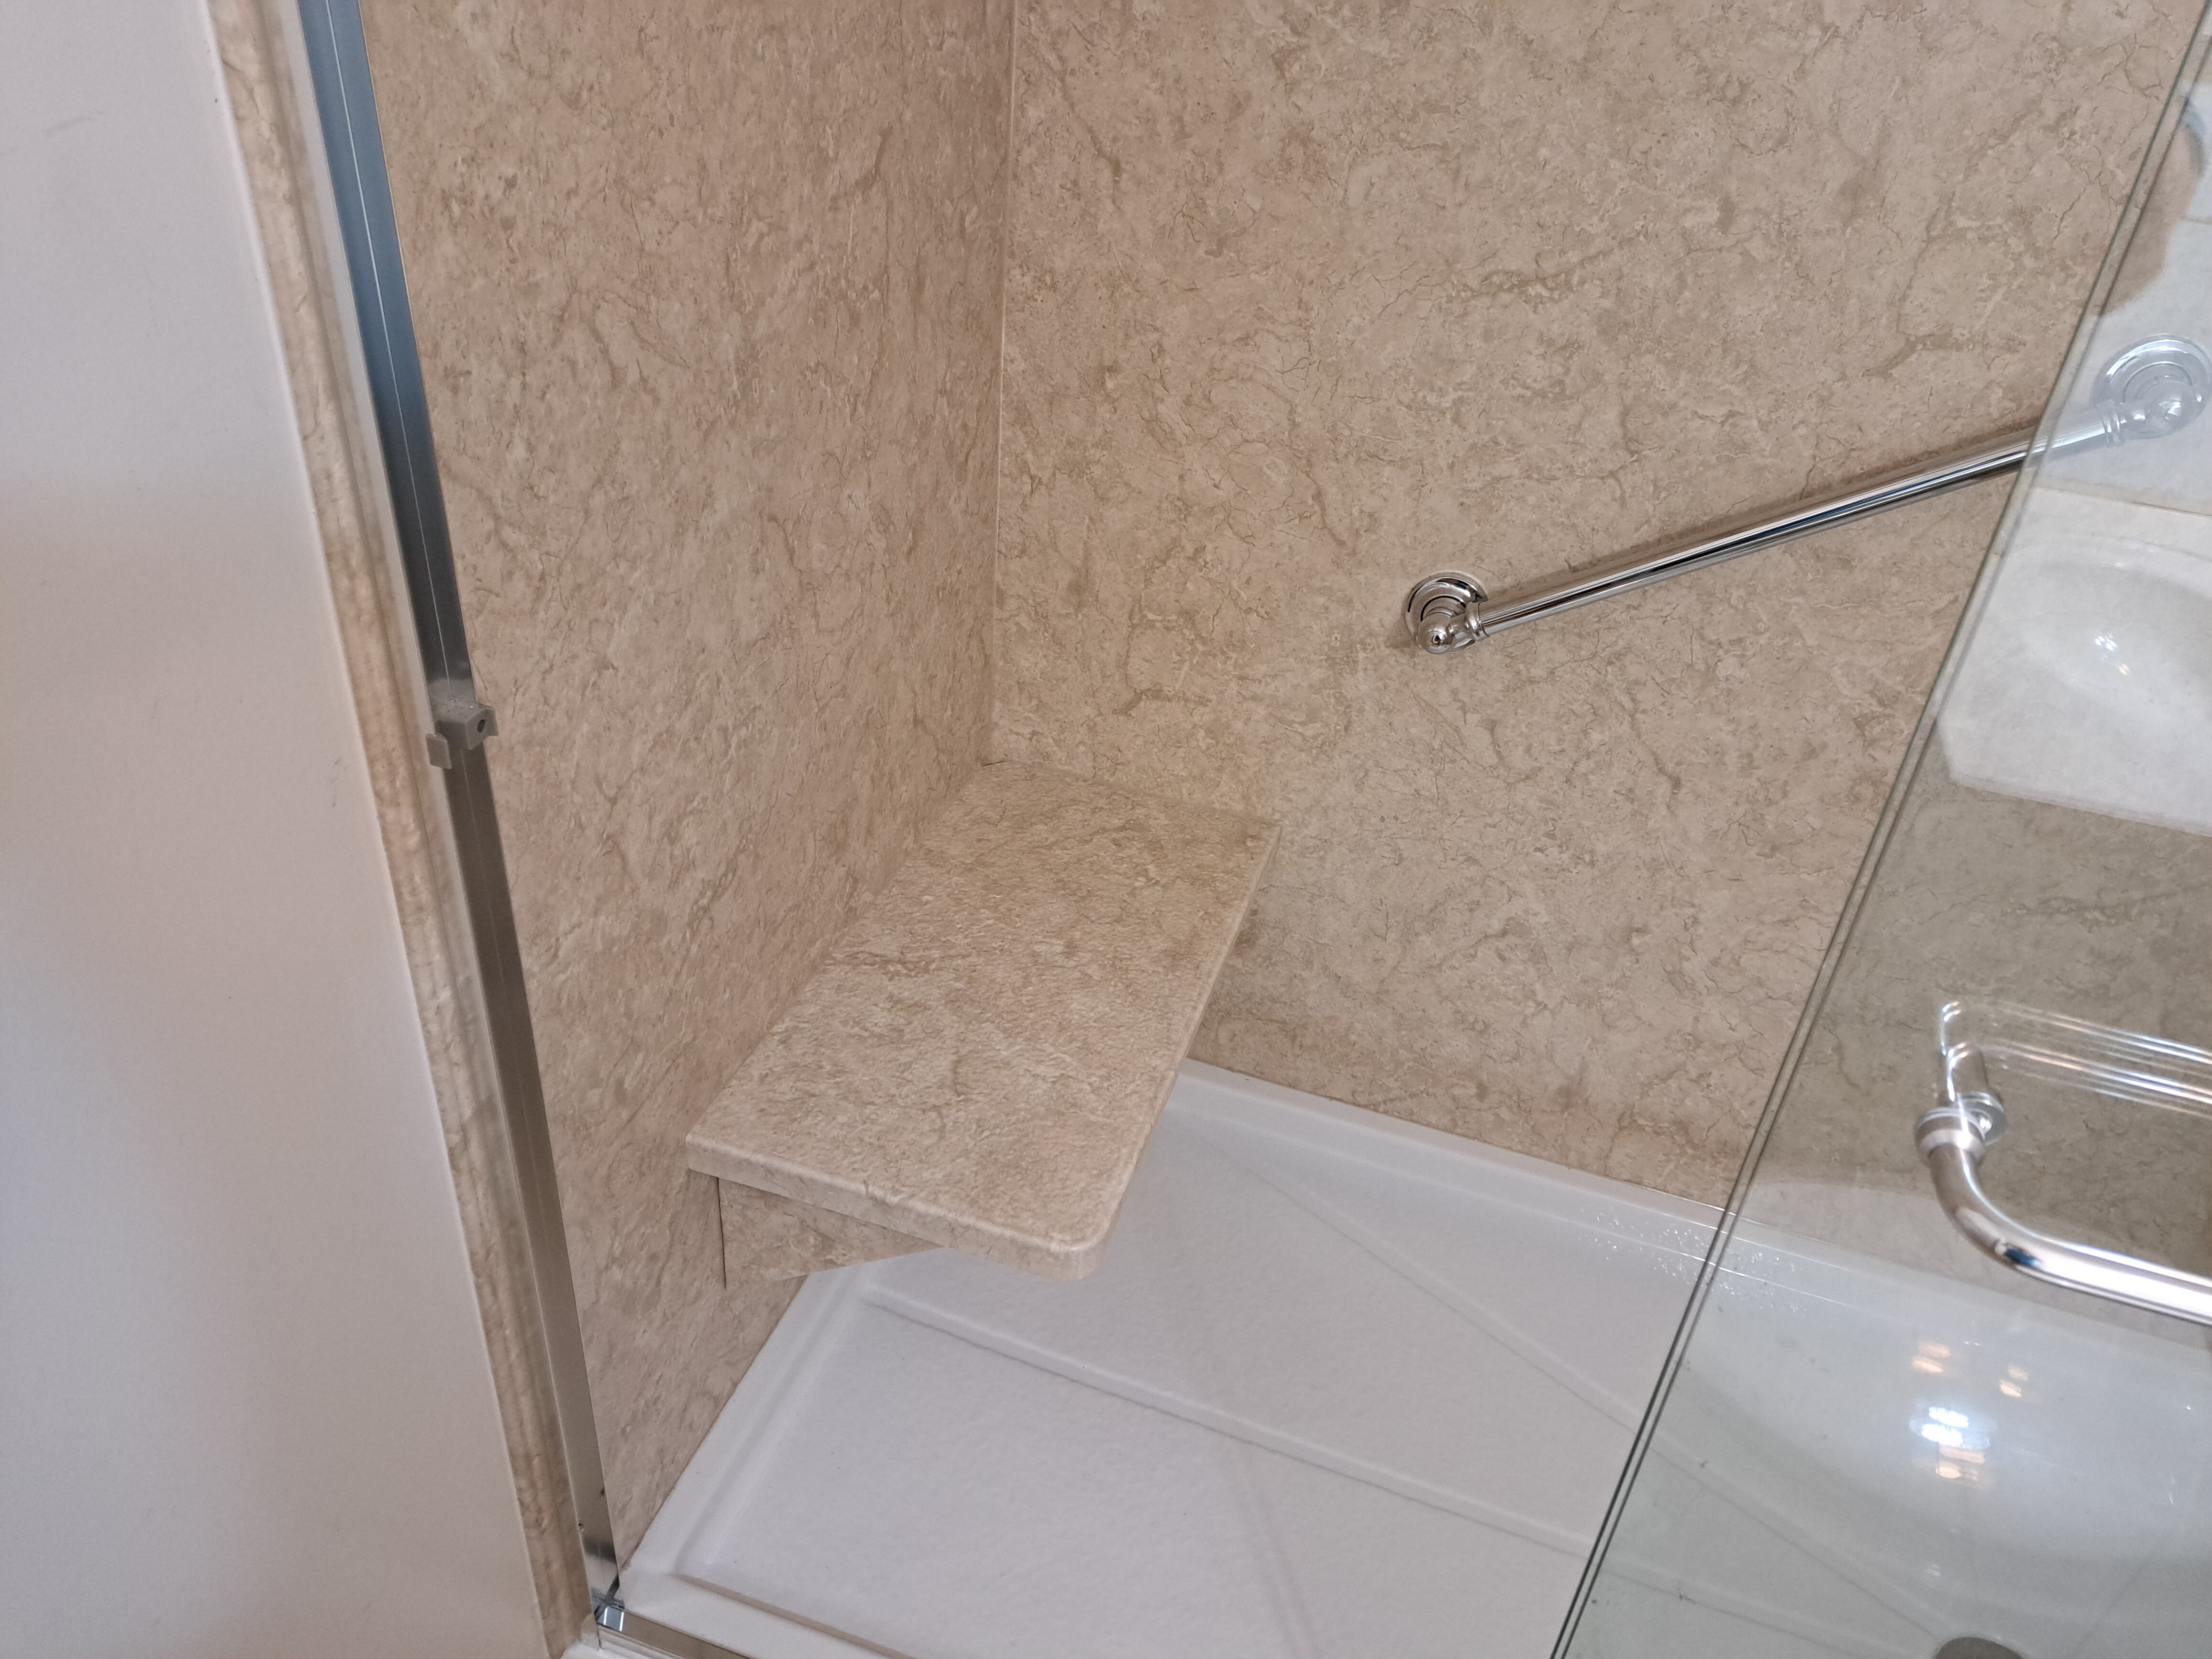 Shower seat and grab bar